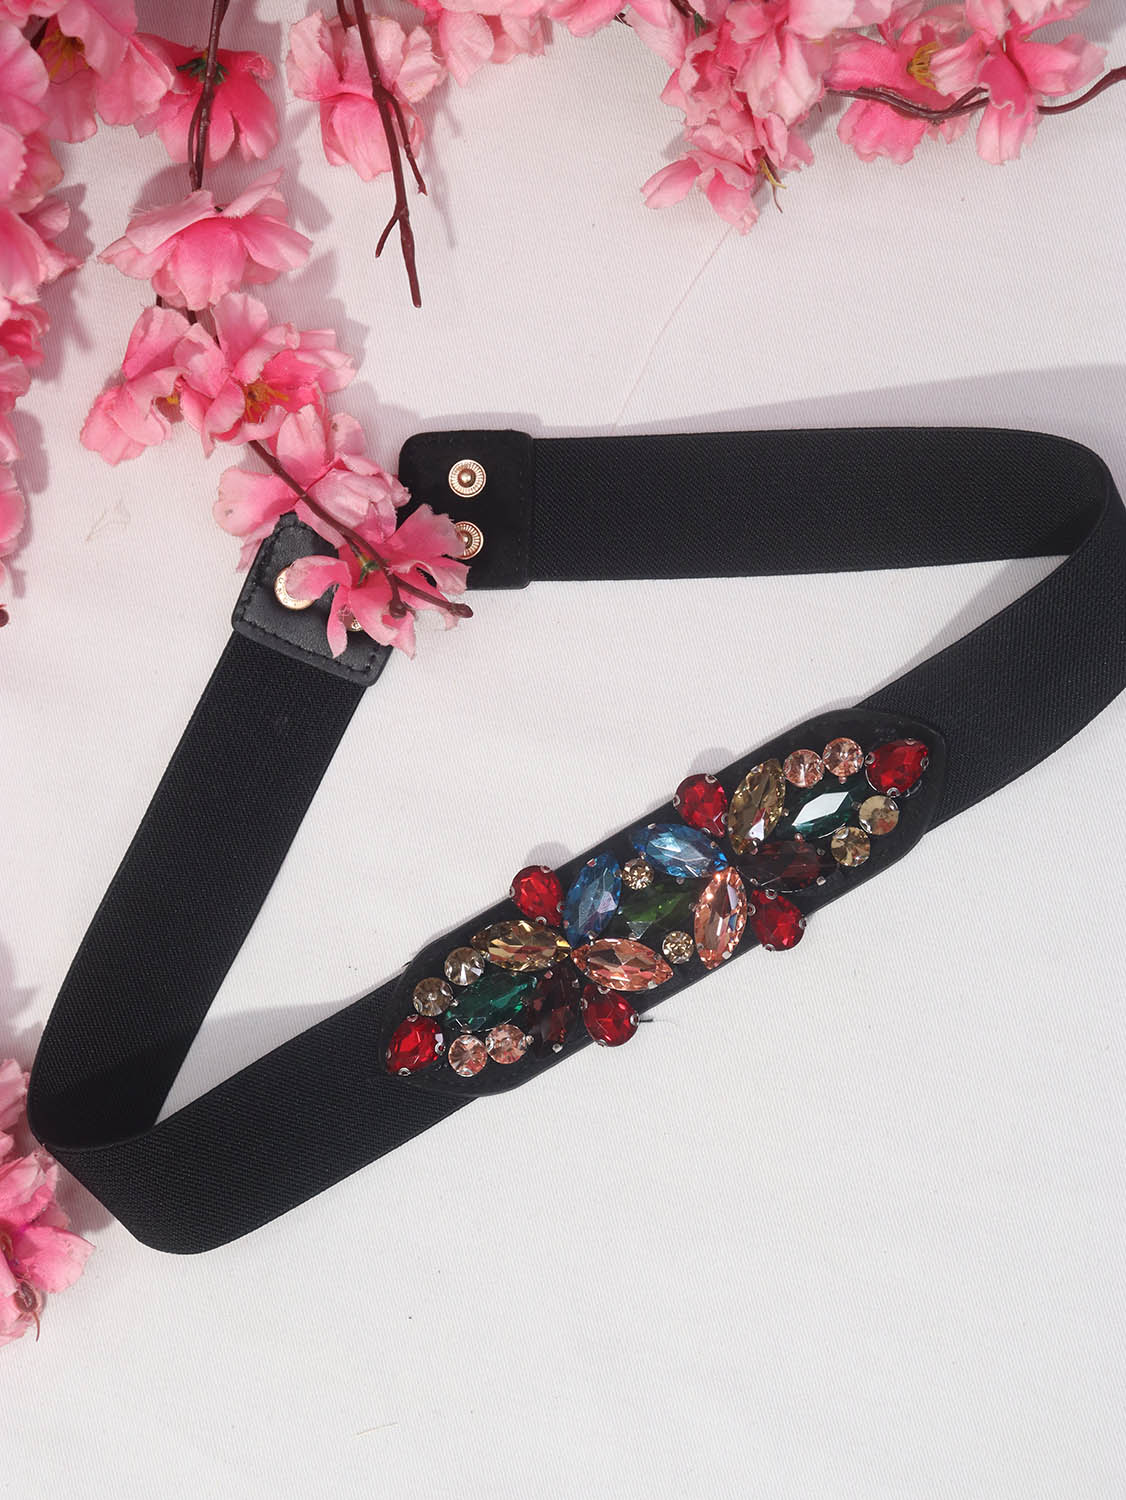 Upgrade Your Style with Blackout Buckle-Up Belts - Shop Now! - Luxurion World